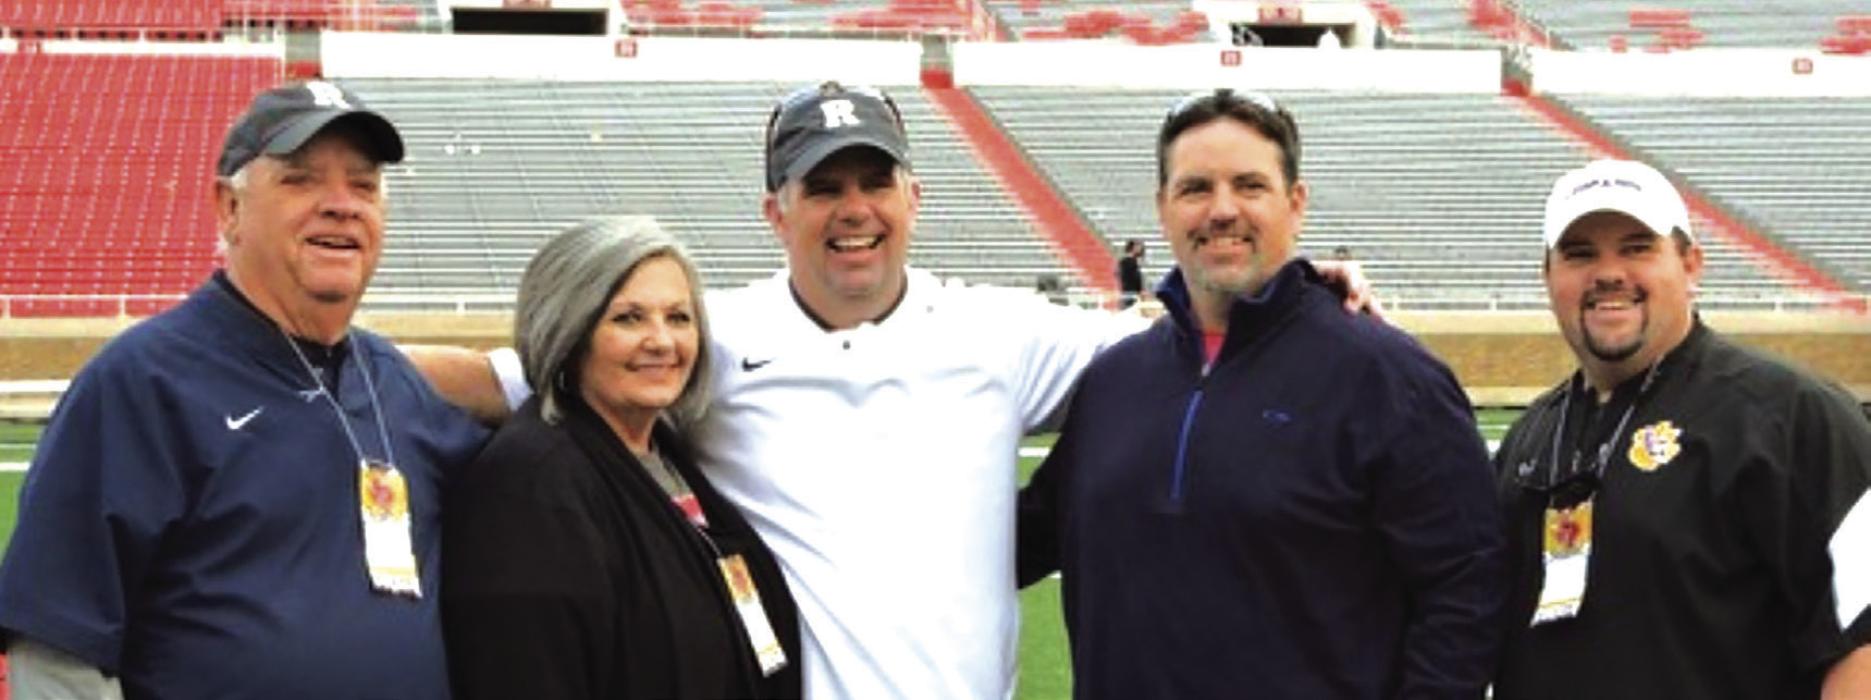 The Kates family at Texas Tech’s Jones Stadium. From left, George and Shary Kates and their three sons Ged (head coach at Richland), Matt (head coach at La Grange) and Will (head coach at Merkel).